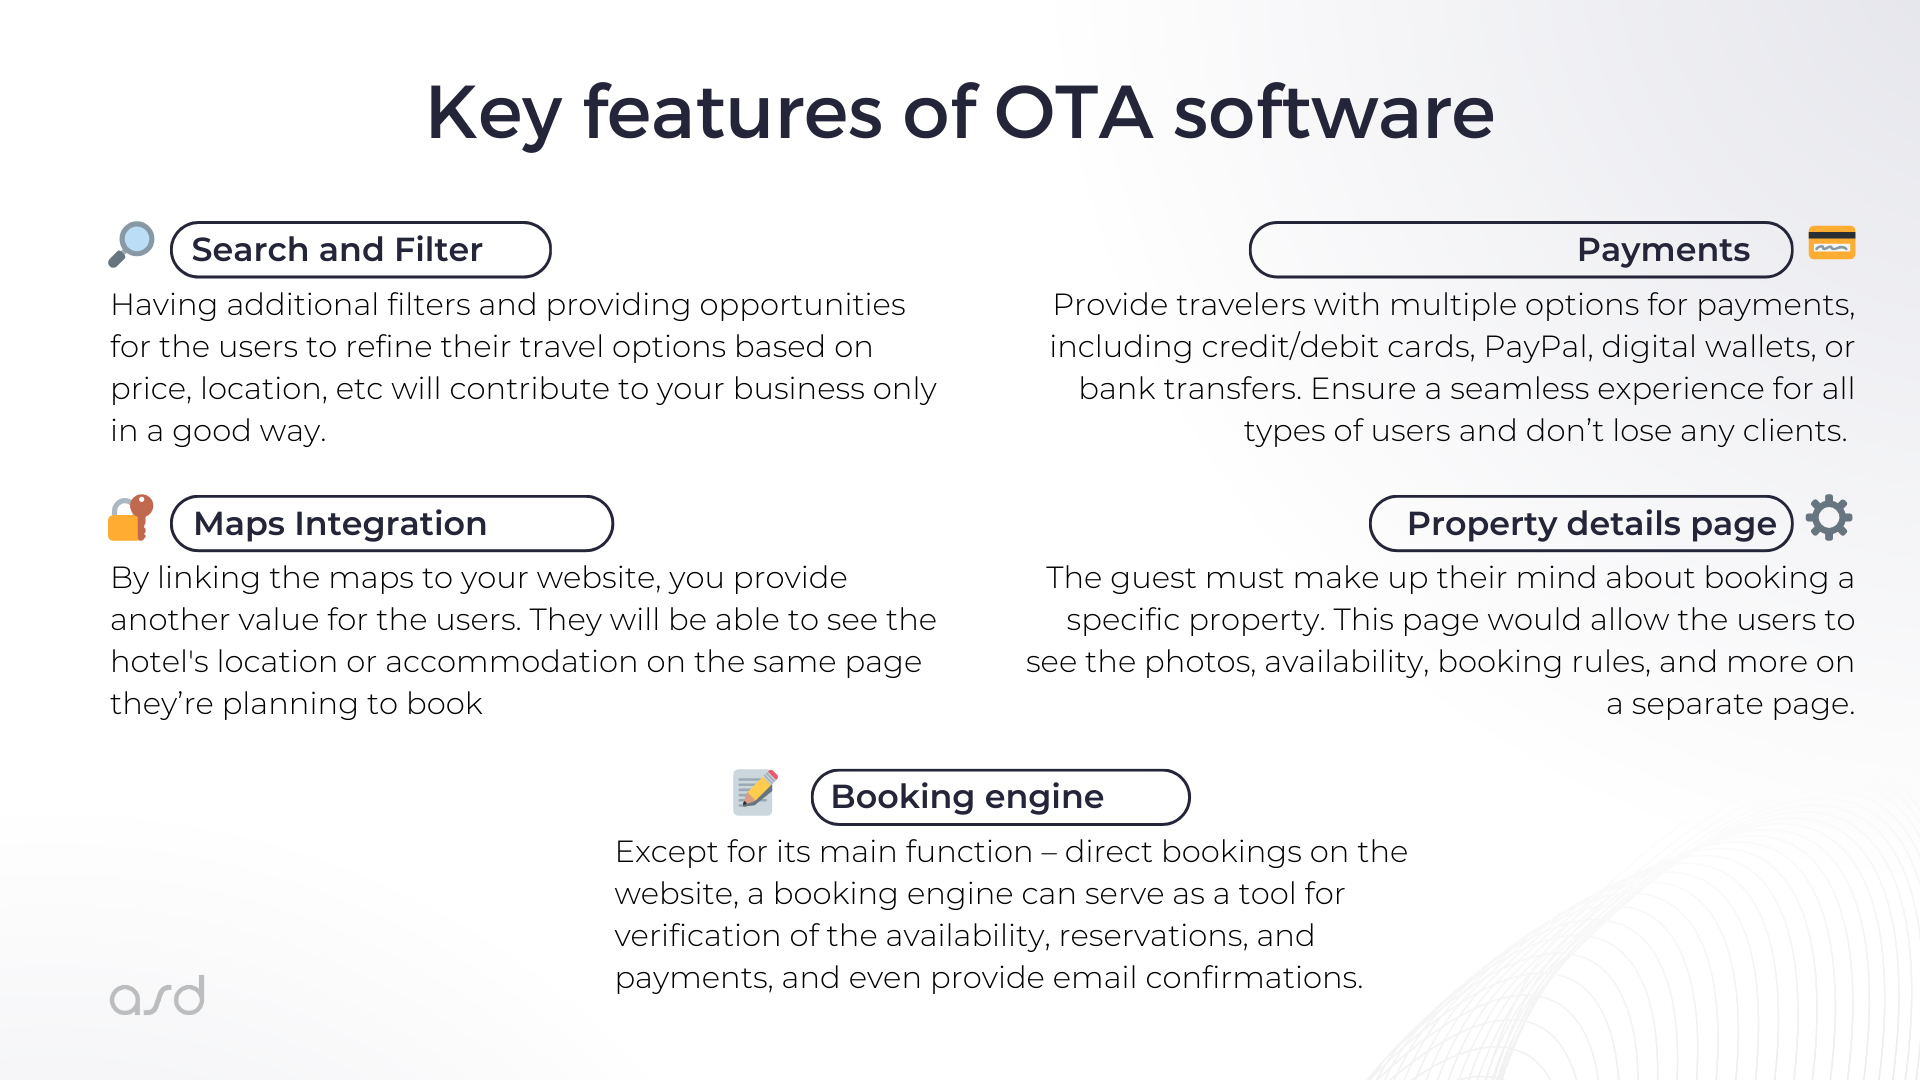 Key features of OTA software